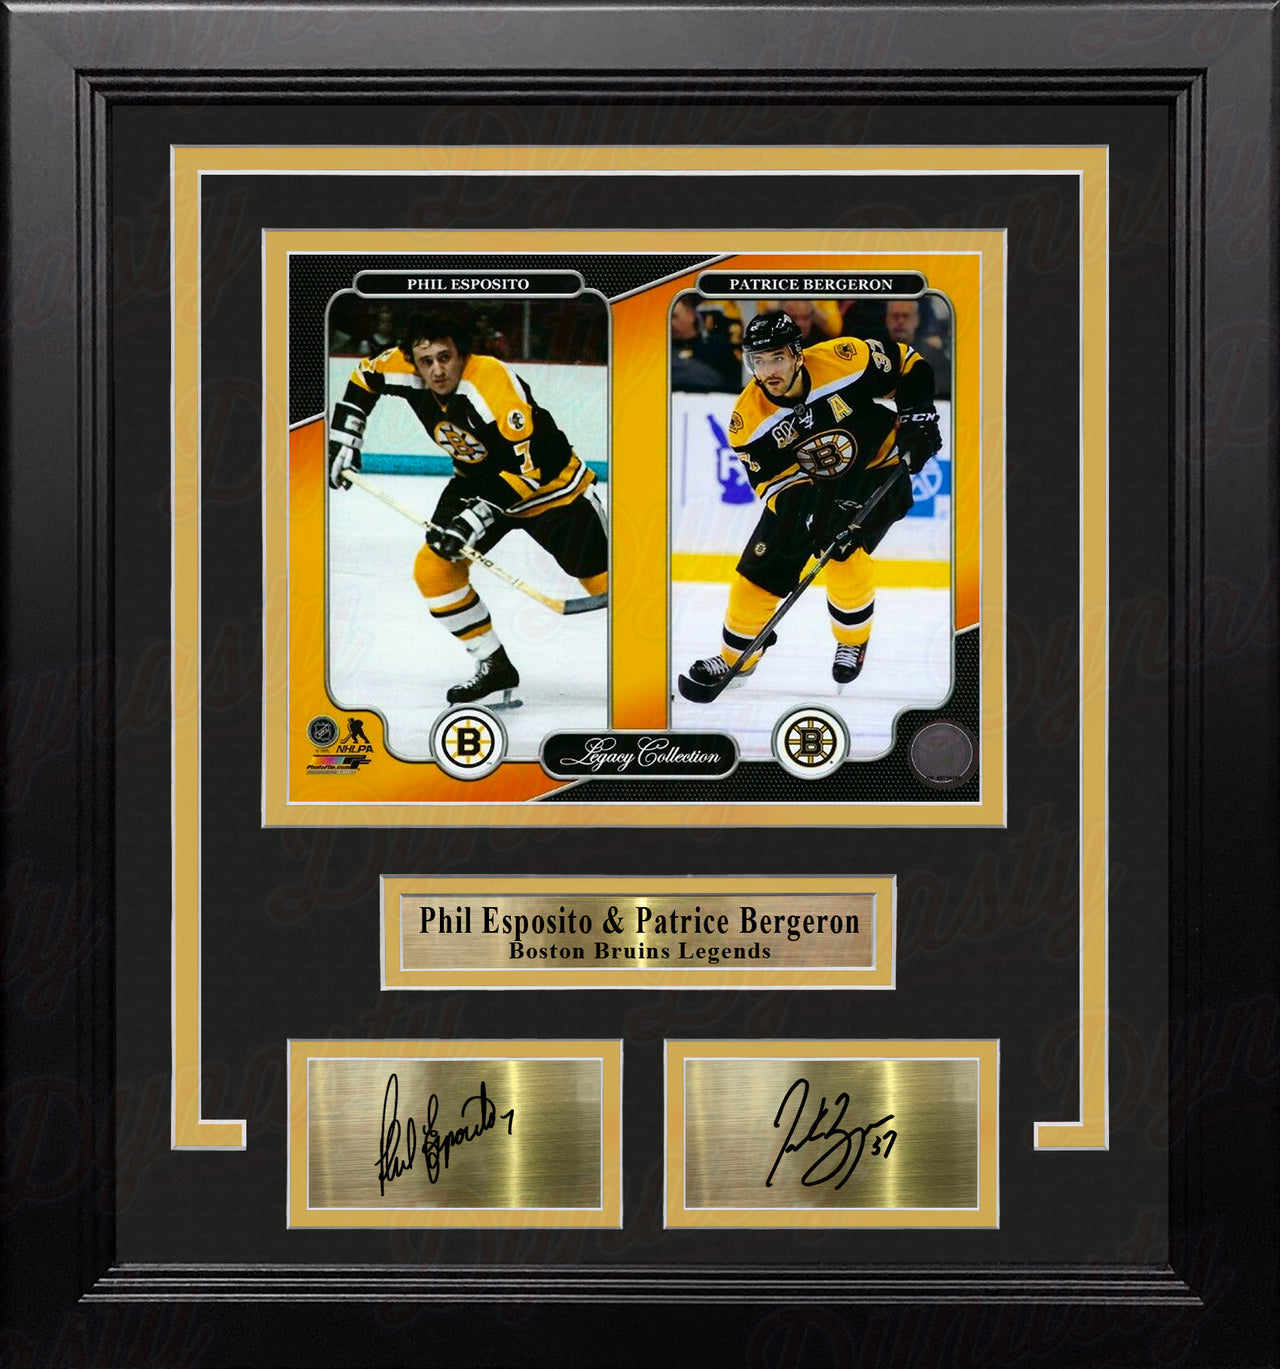 Phil Esposito & Patrice Bergeron Boston Bruins 8x10 Framed Legacy Photo with Engraved Autographs